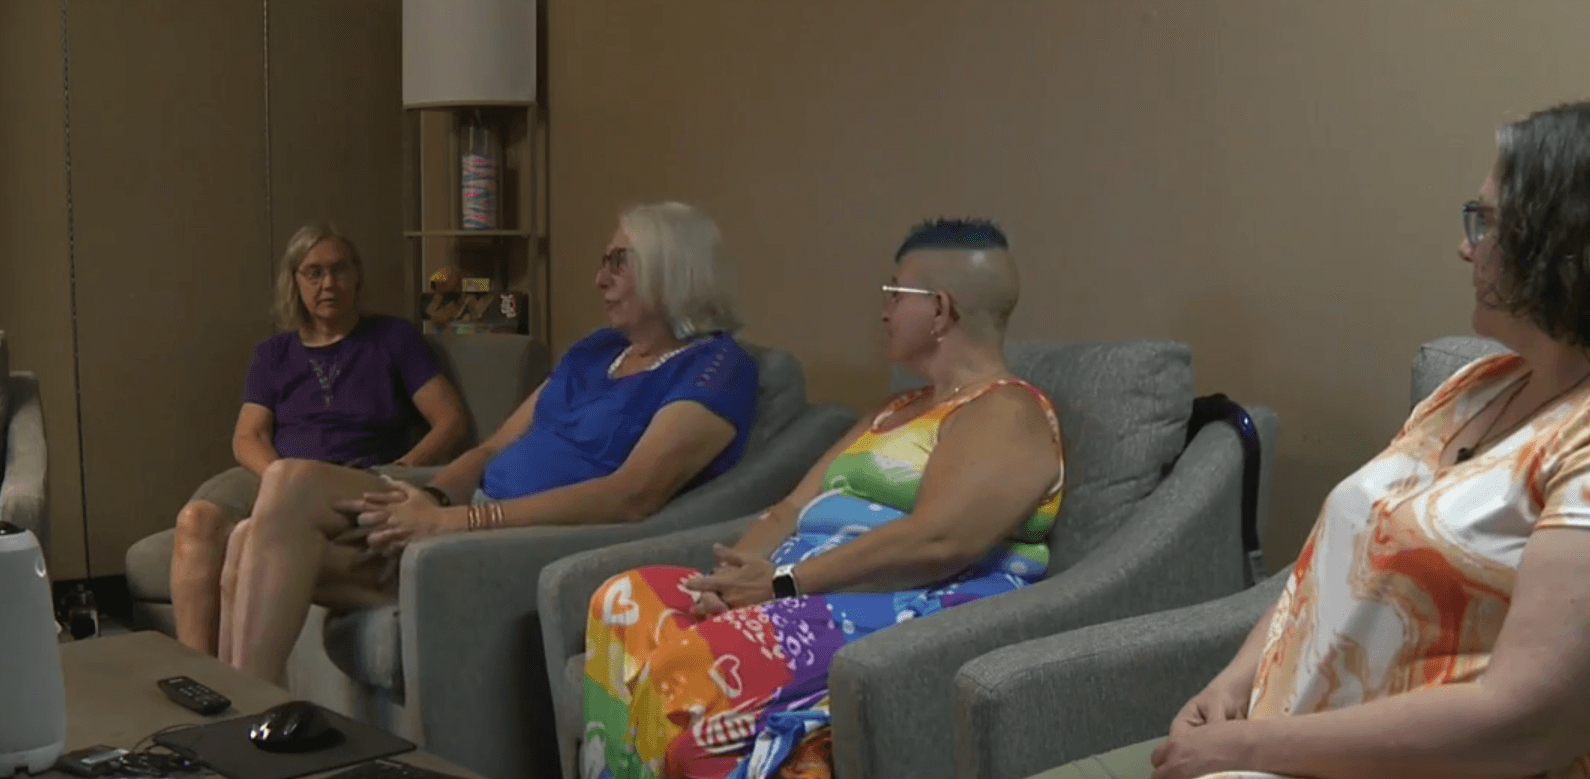 WGAL8 Coverage: "Support group in York County provides safe space for older members of LGBTQ community"